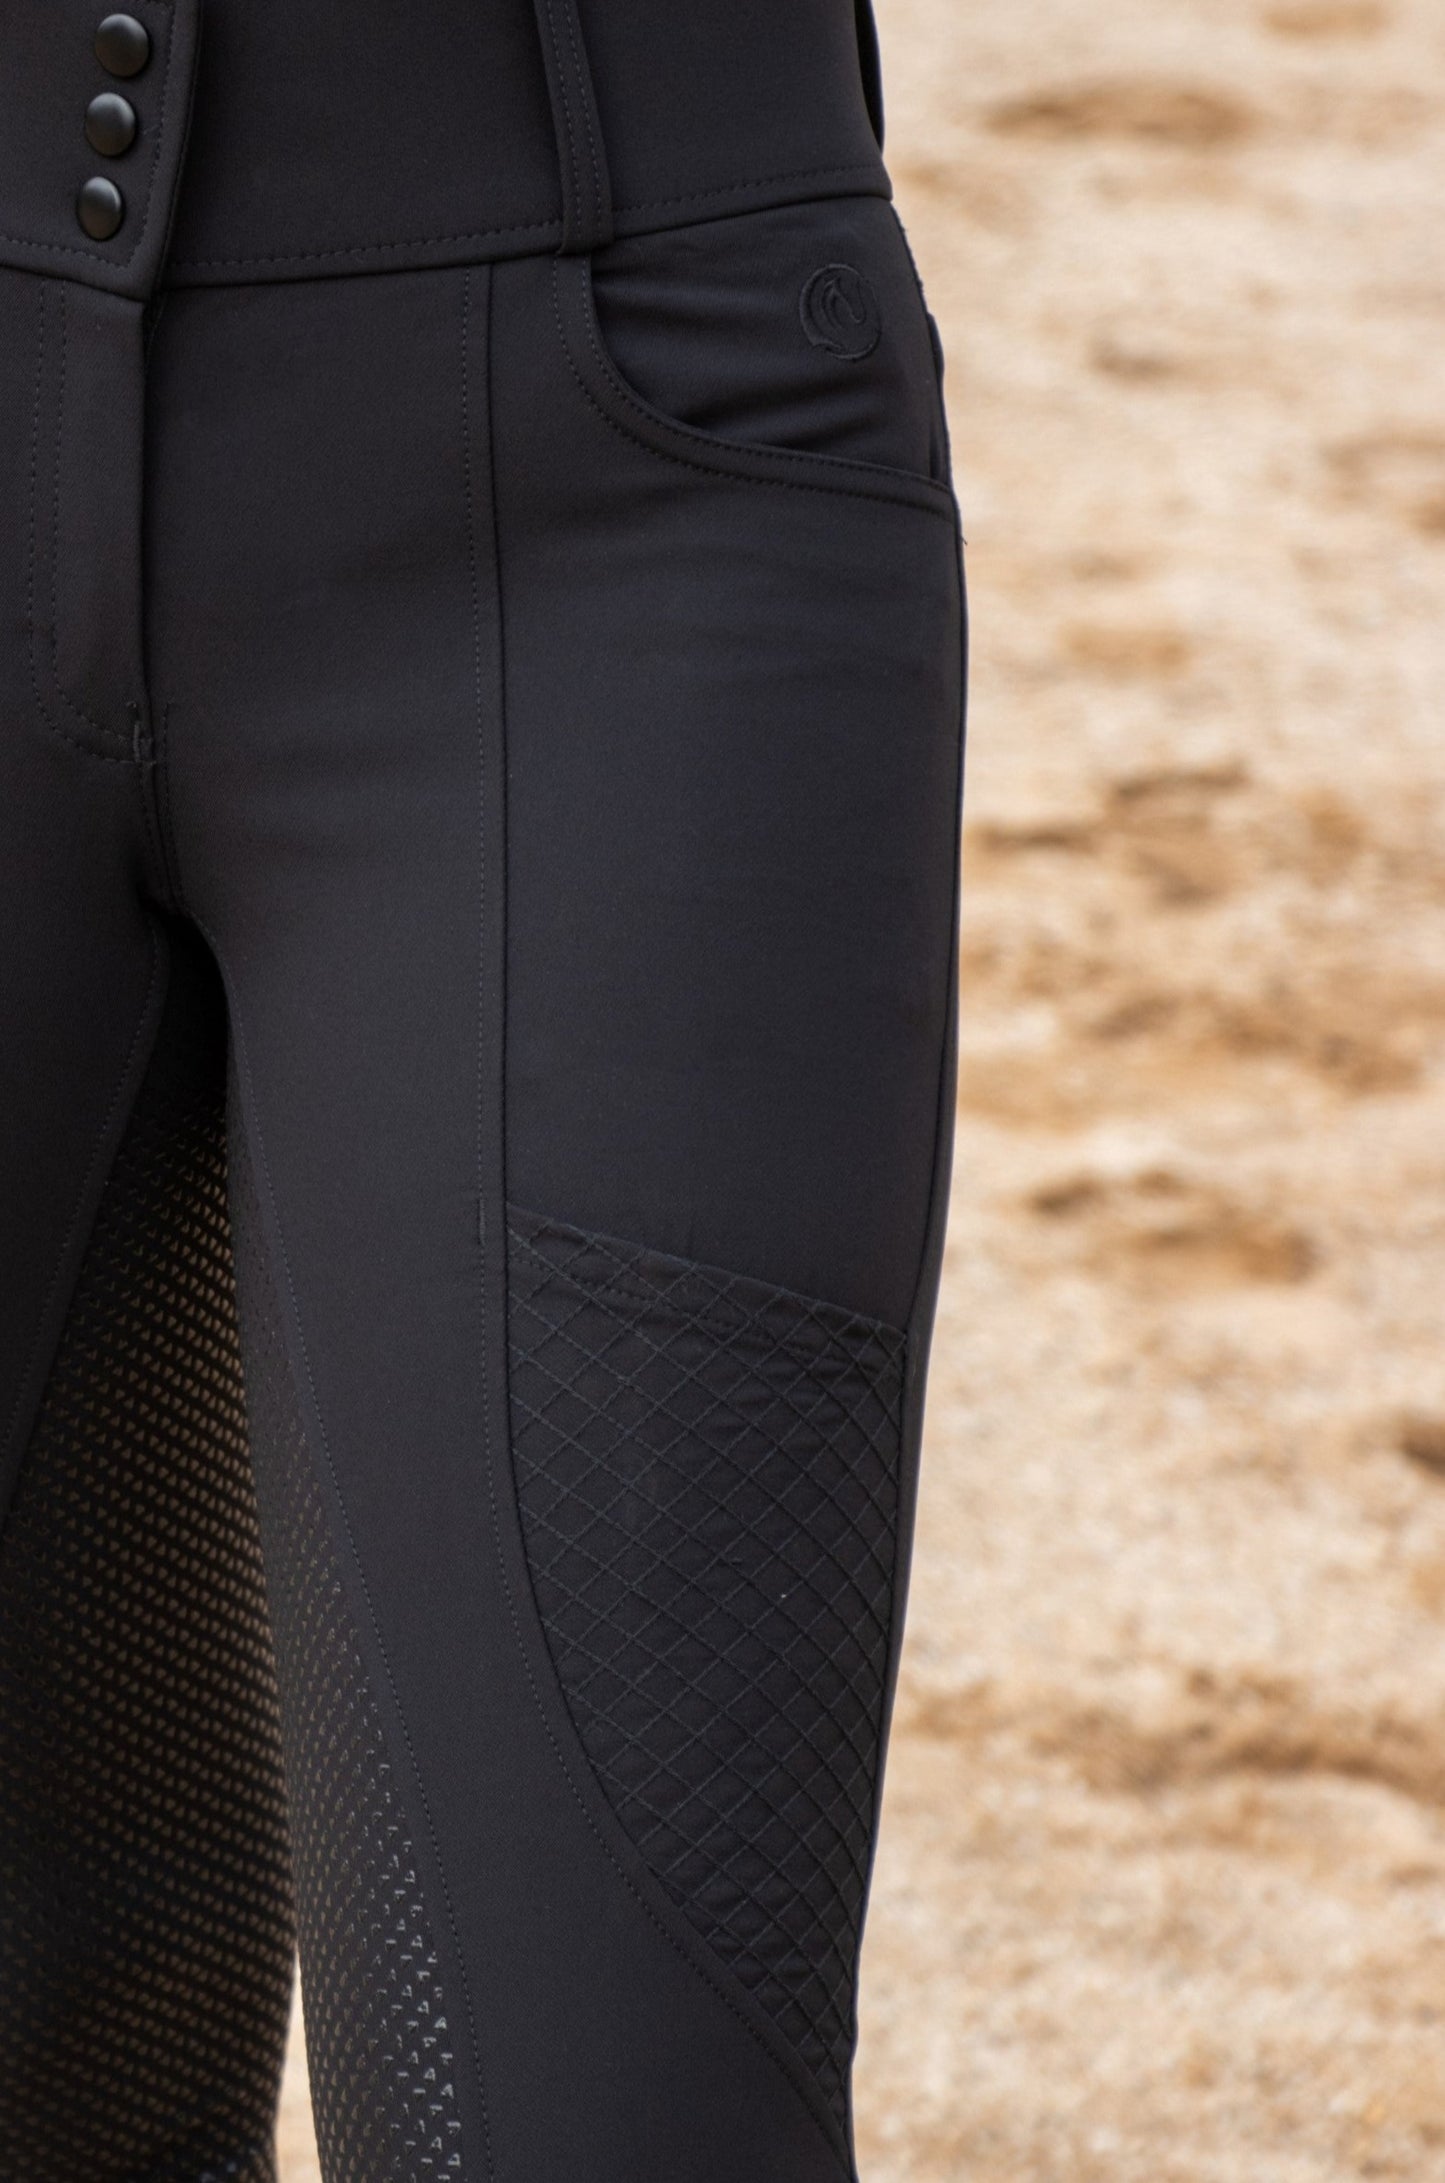 Amber Quilt Trim Breeches - Black NEW STYLE